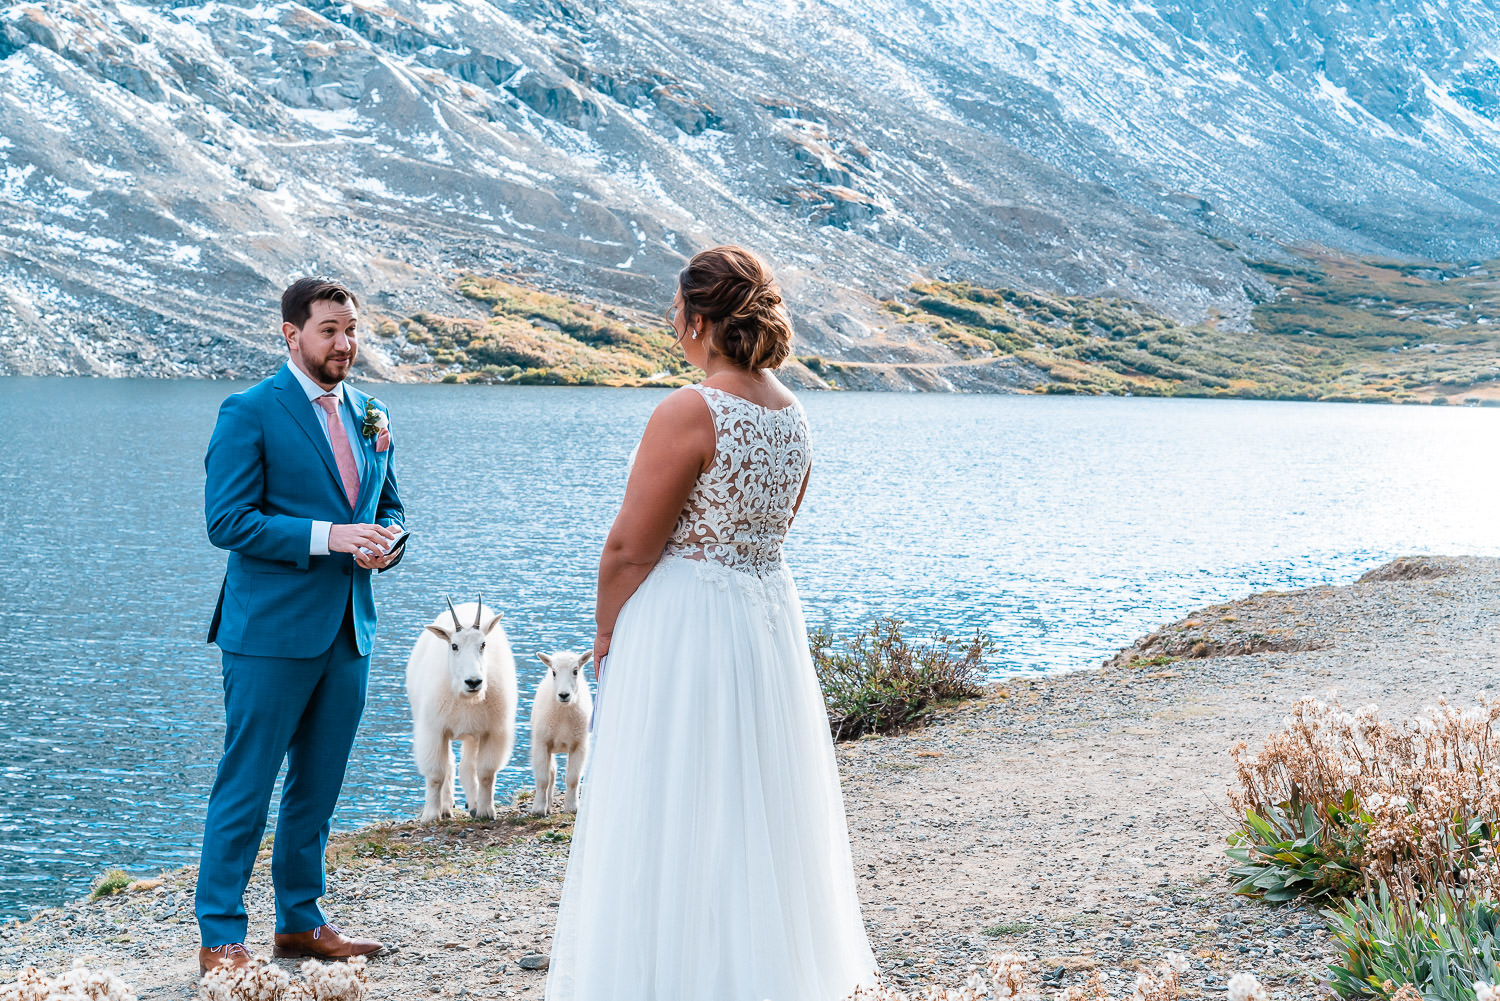 Bride and groom read their vows while mountain goats watch on in the mountains of Breckenridge Colorado